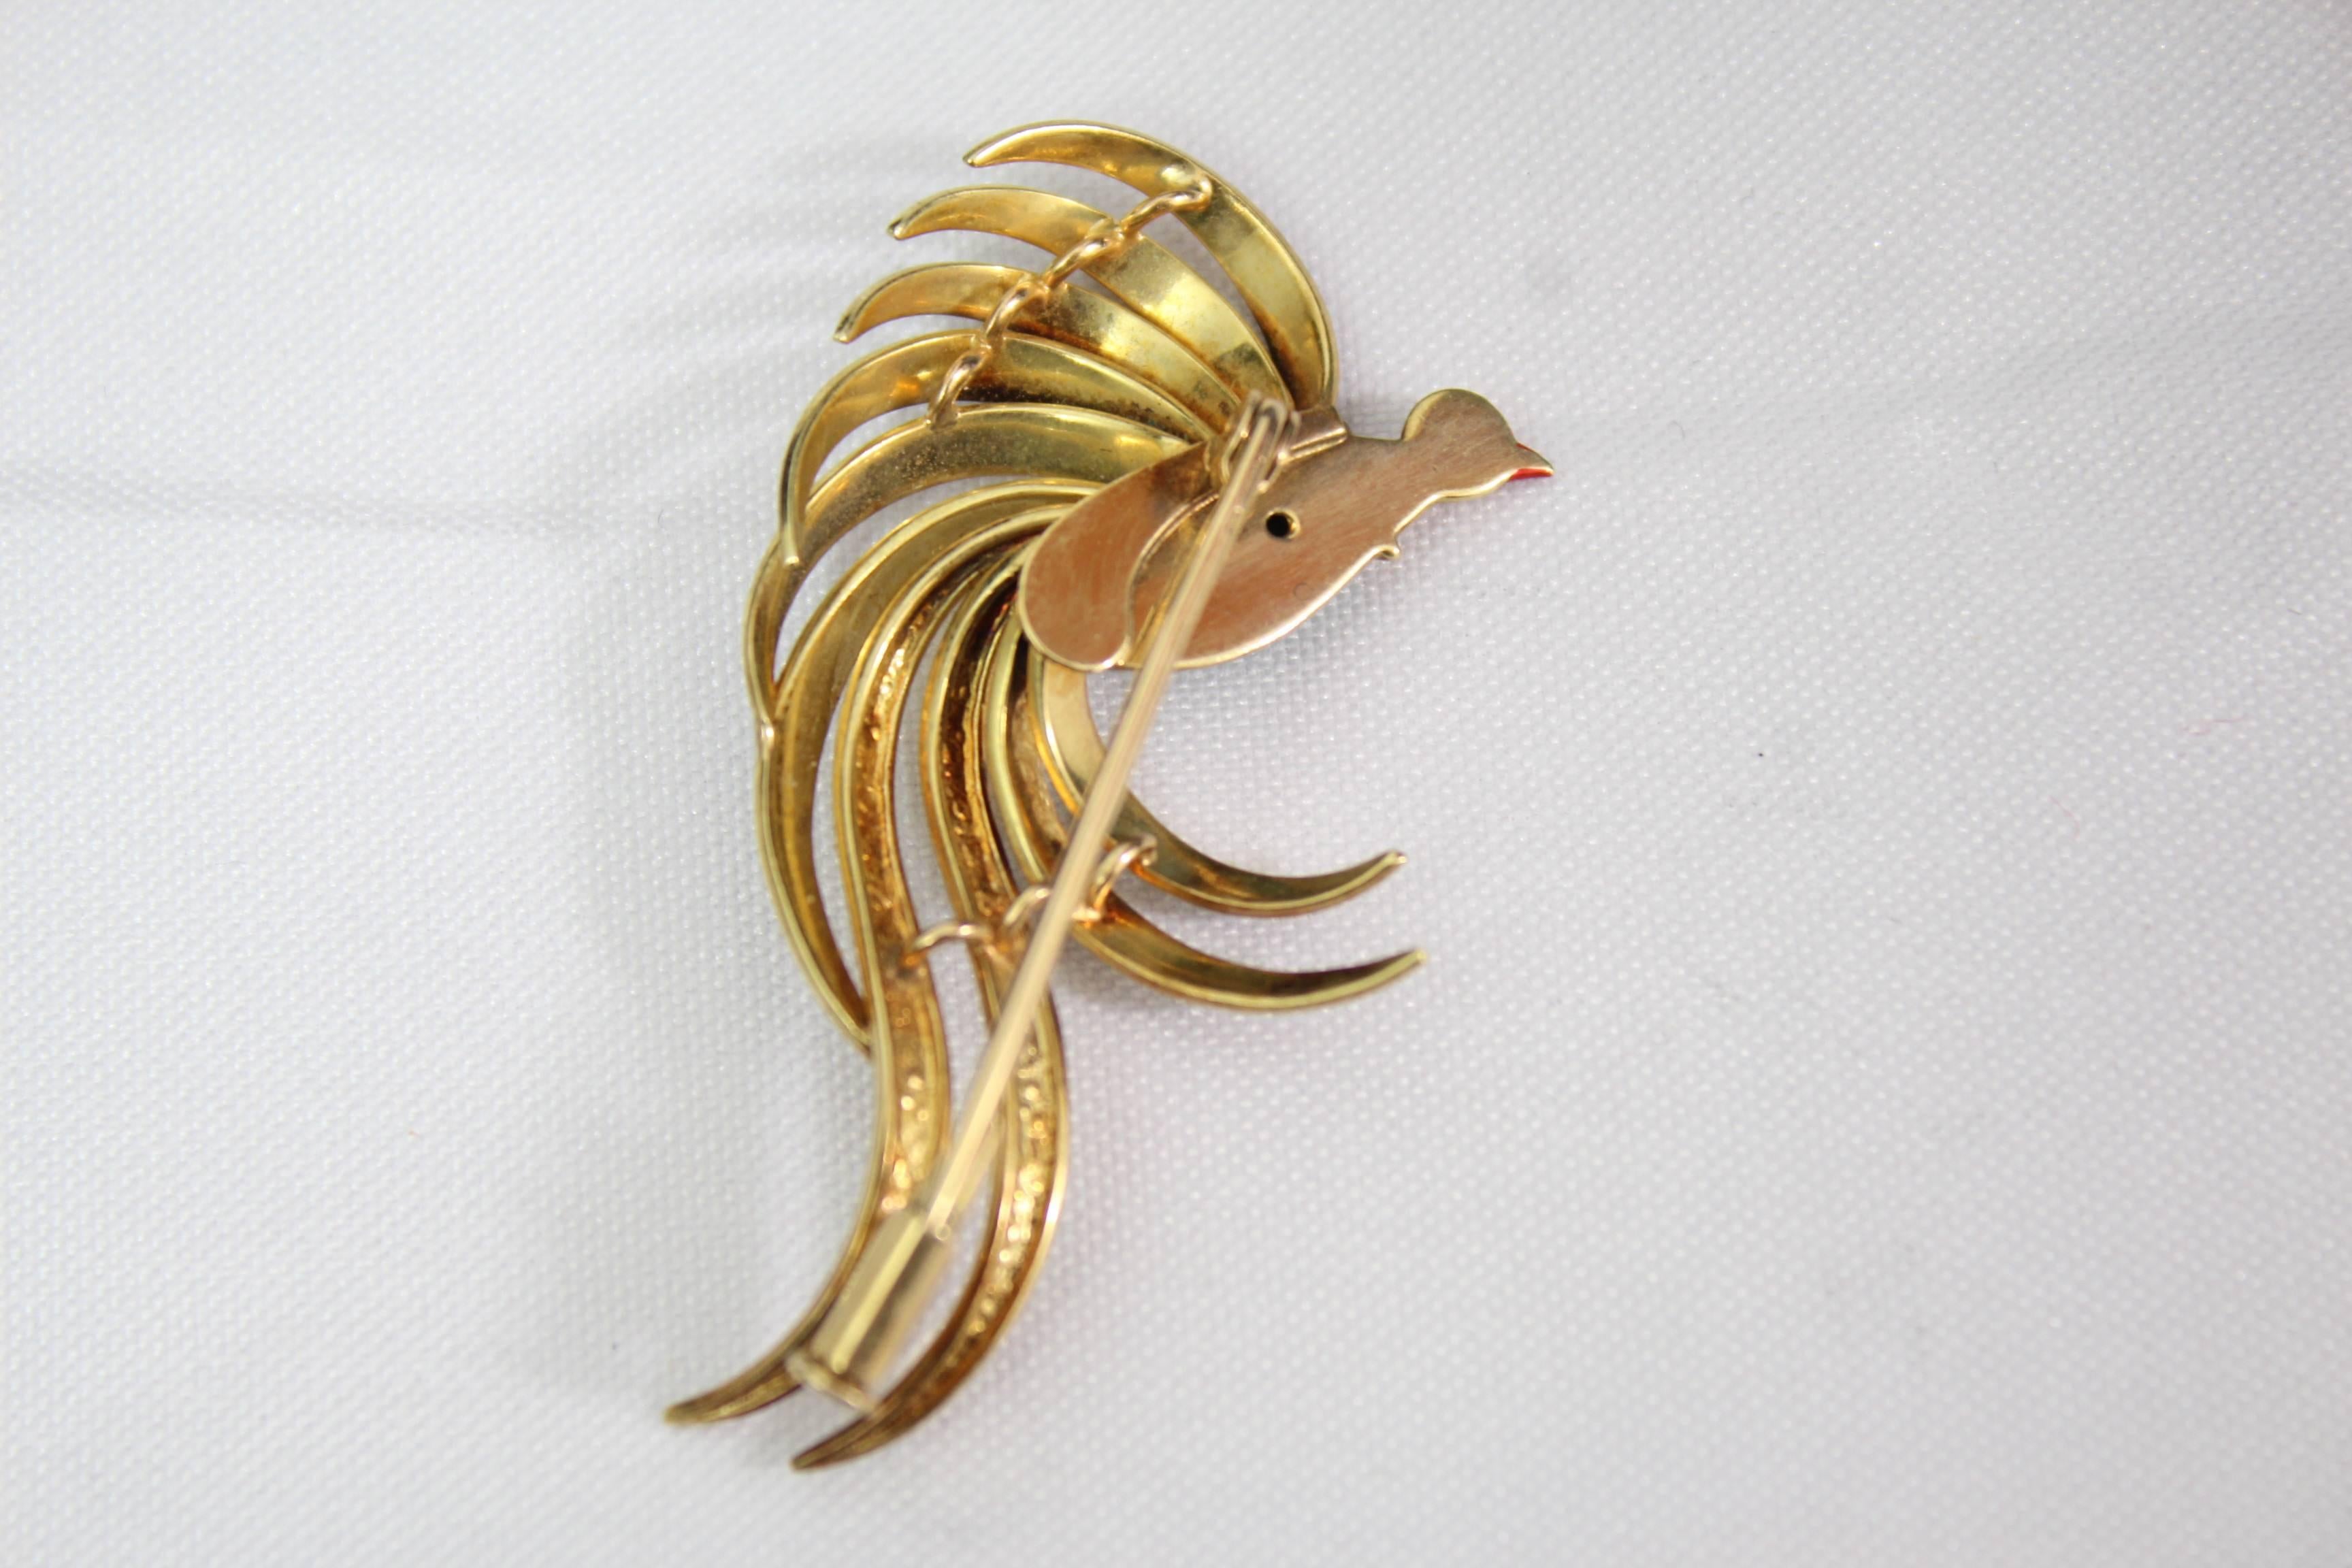 Lovely Enamel Brooche in 18k gold.

Fench work from the 70's

Size of the brooche 2 inches


weight: 7.8 grammes